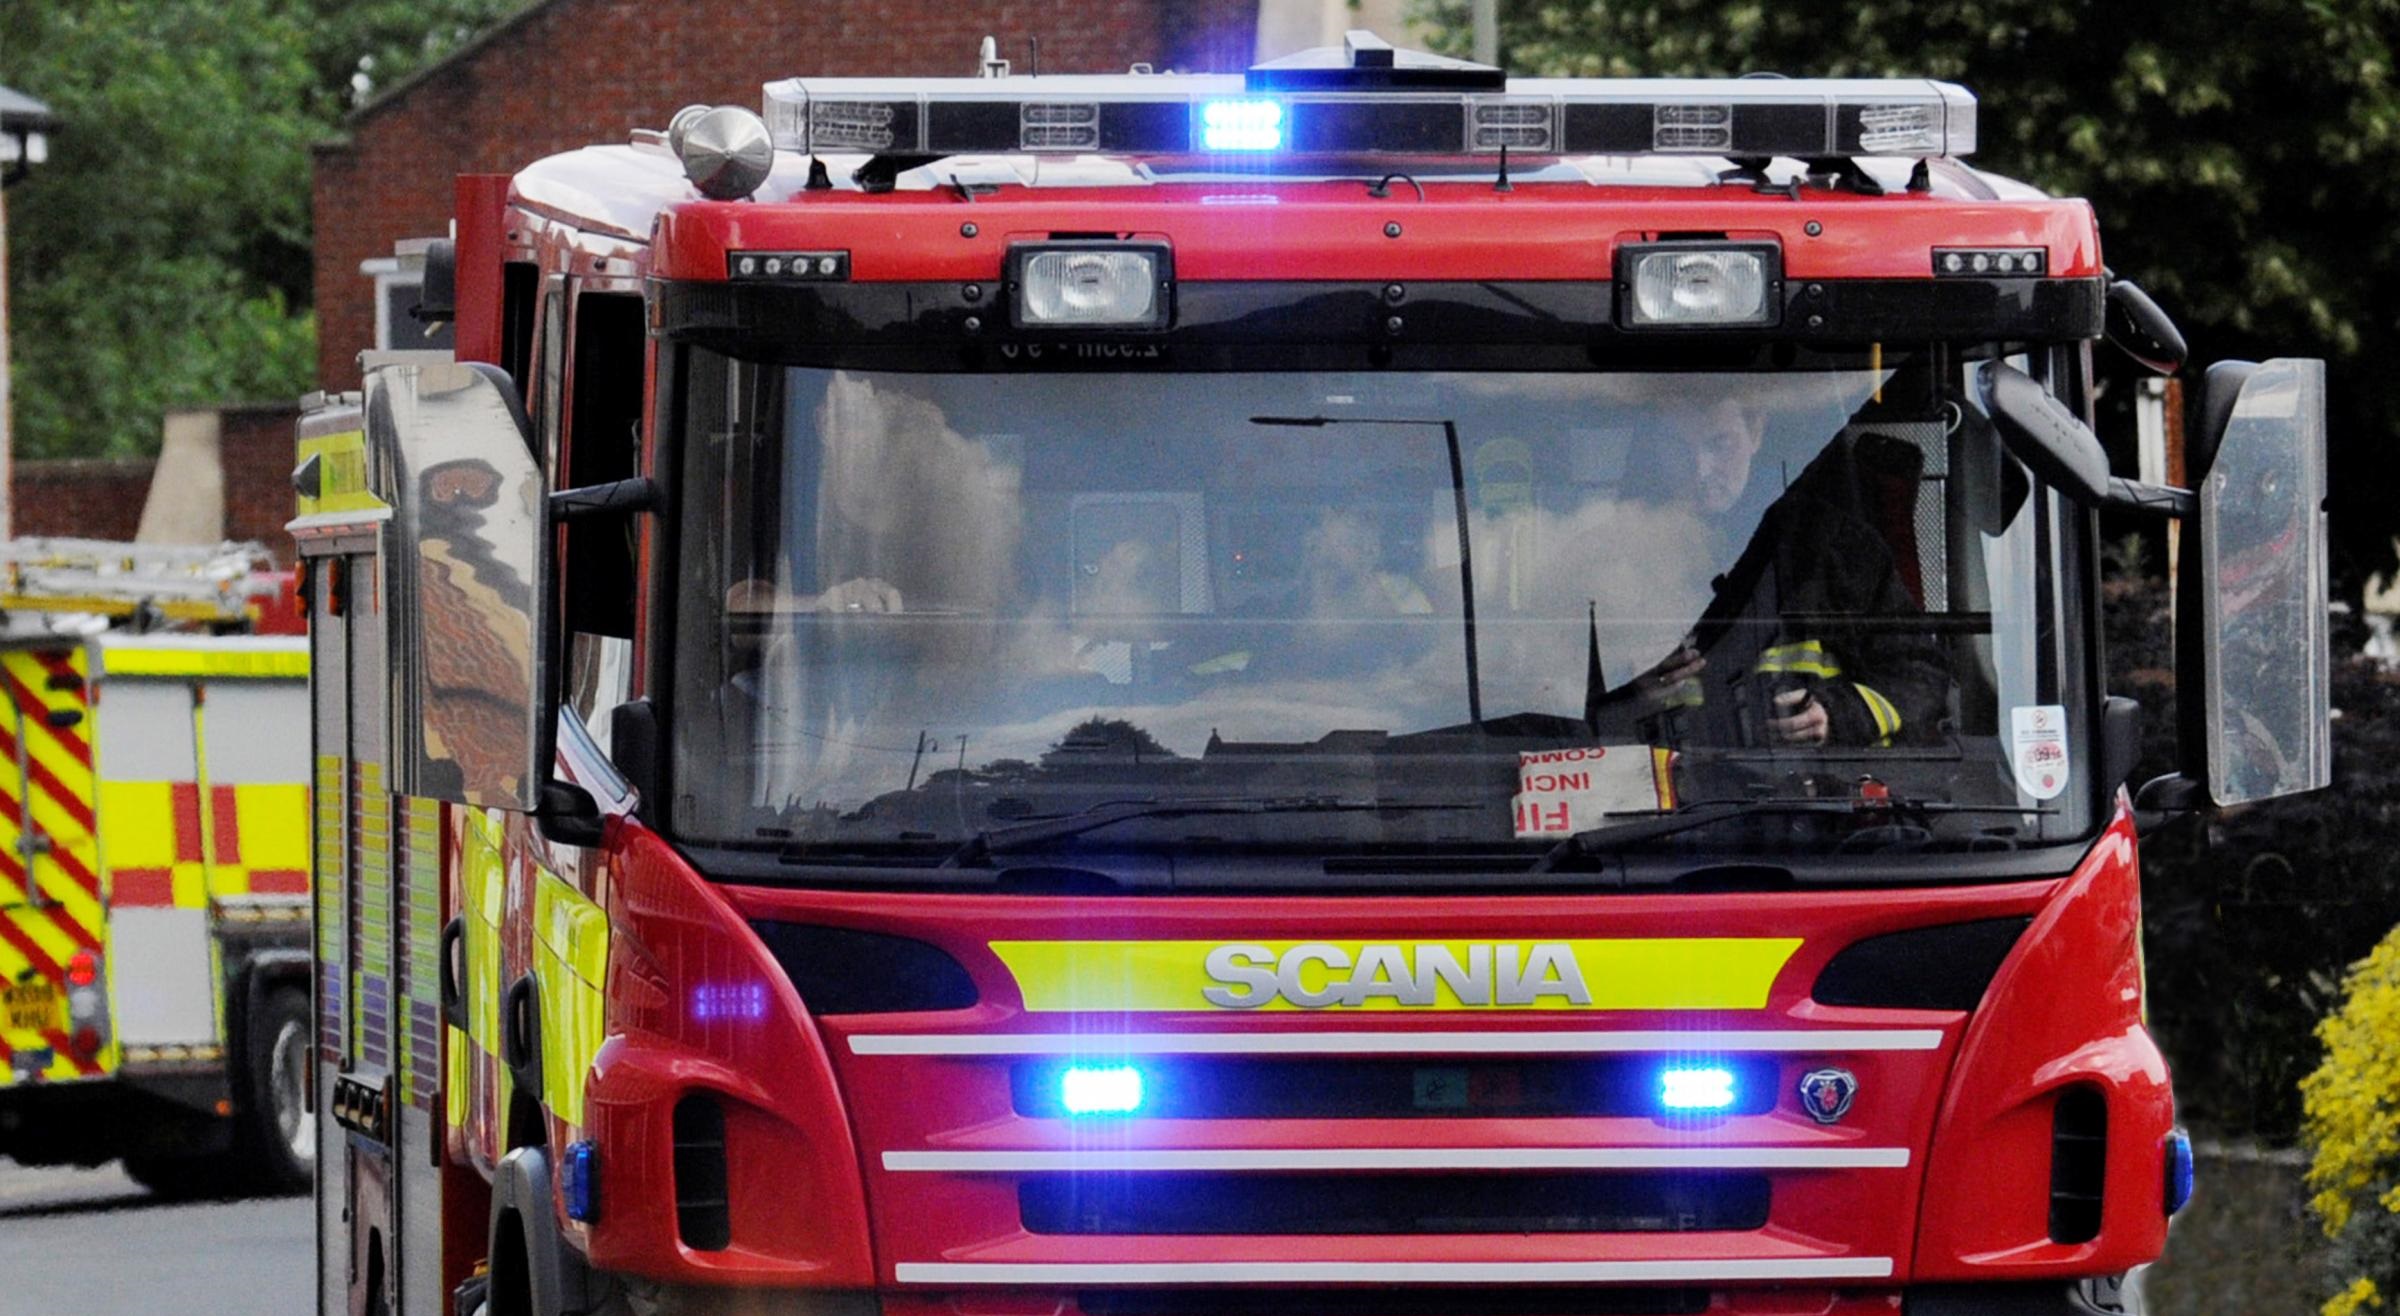 More than 58,000 chickens were saved due to the actions of Gloucestershire fire services